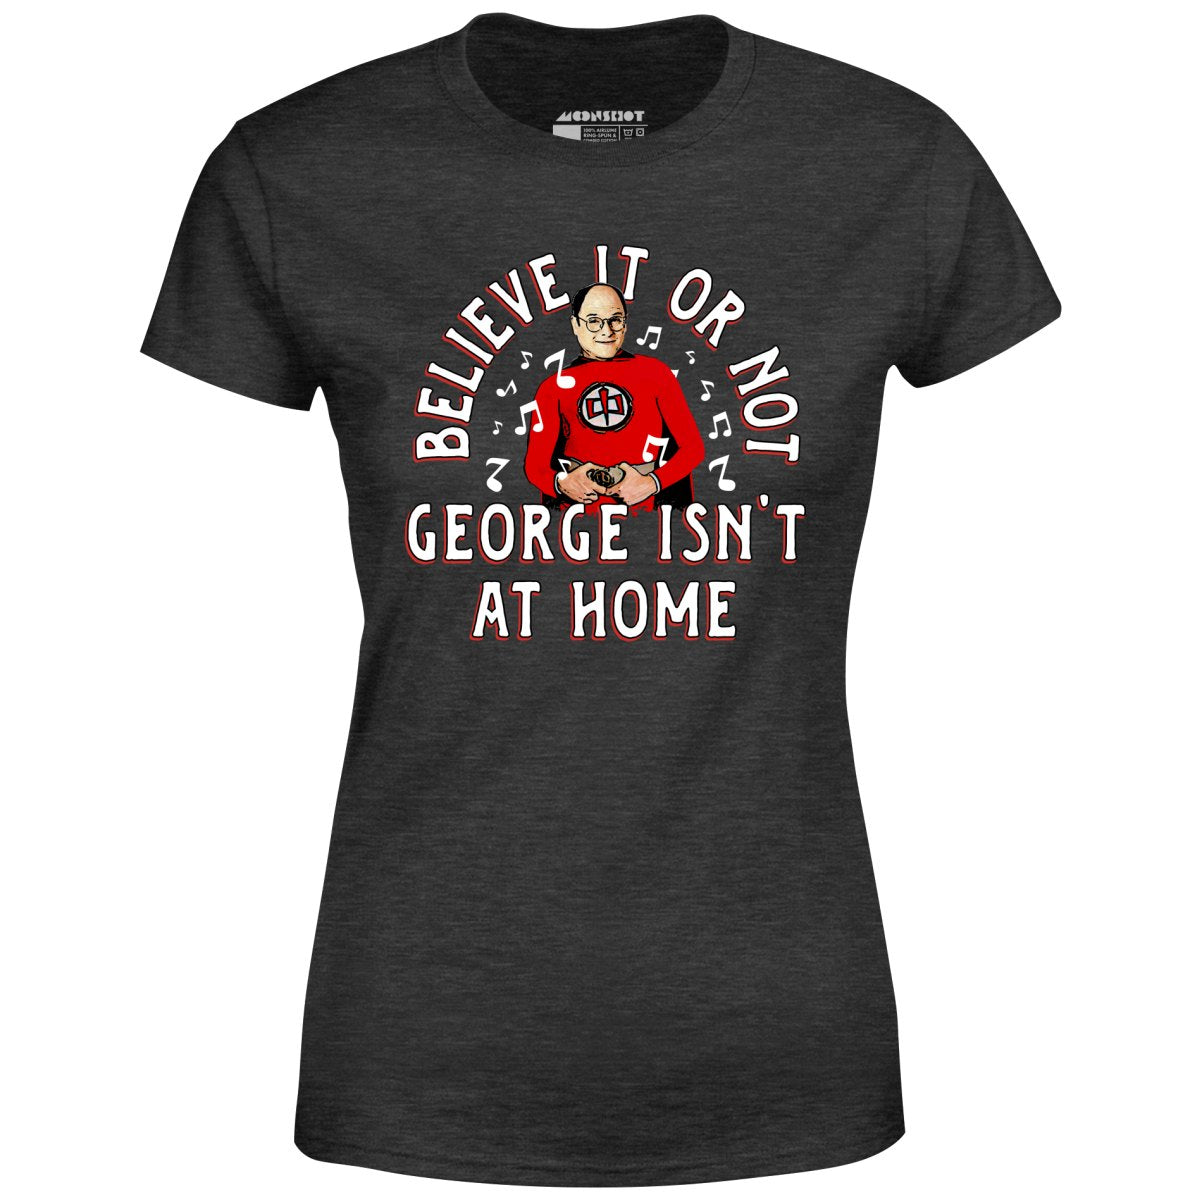 Believe It Or Not George Isn't at Home - Women's T-Shirt